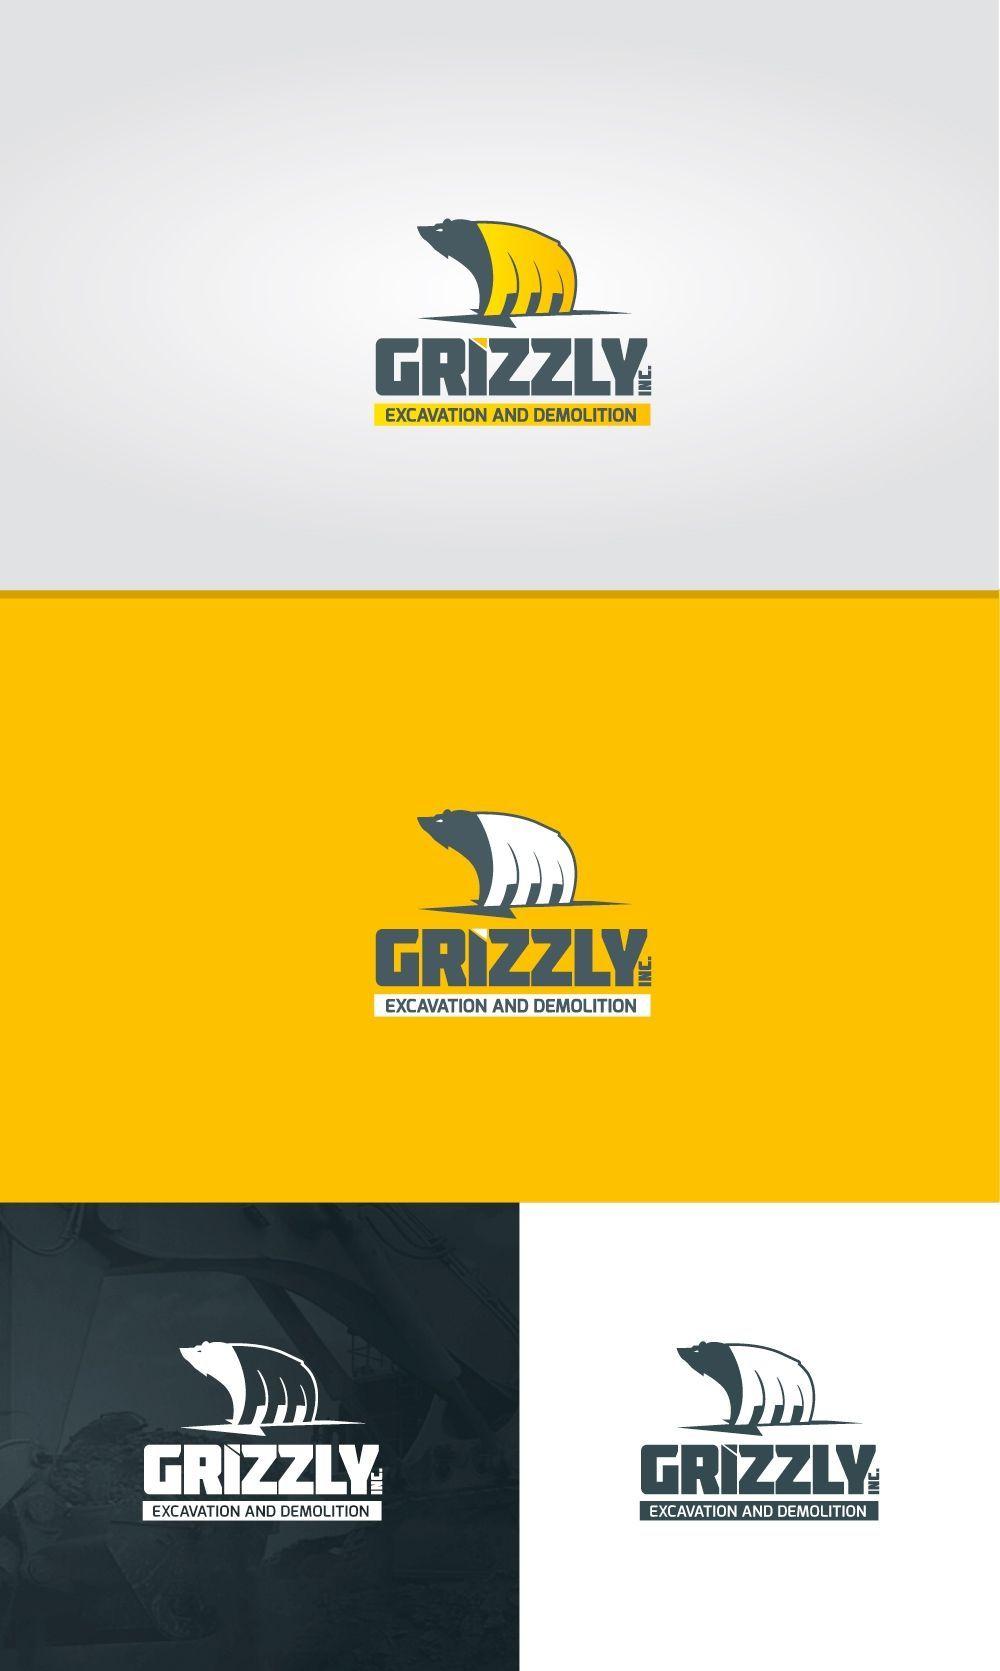 Demolition Logo - Design by Kiboo ™. Create a logo for GRIZZLY. Excavation